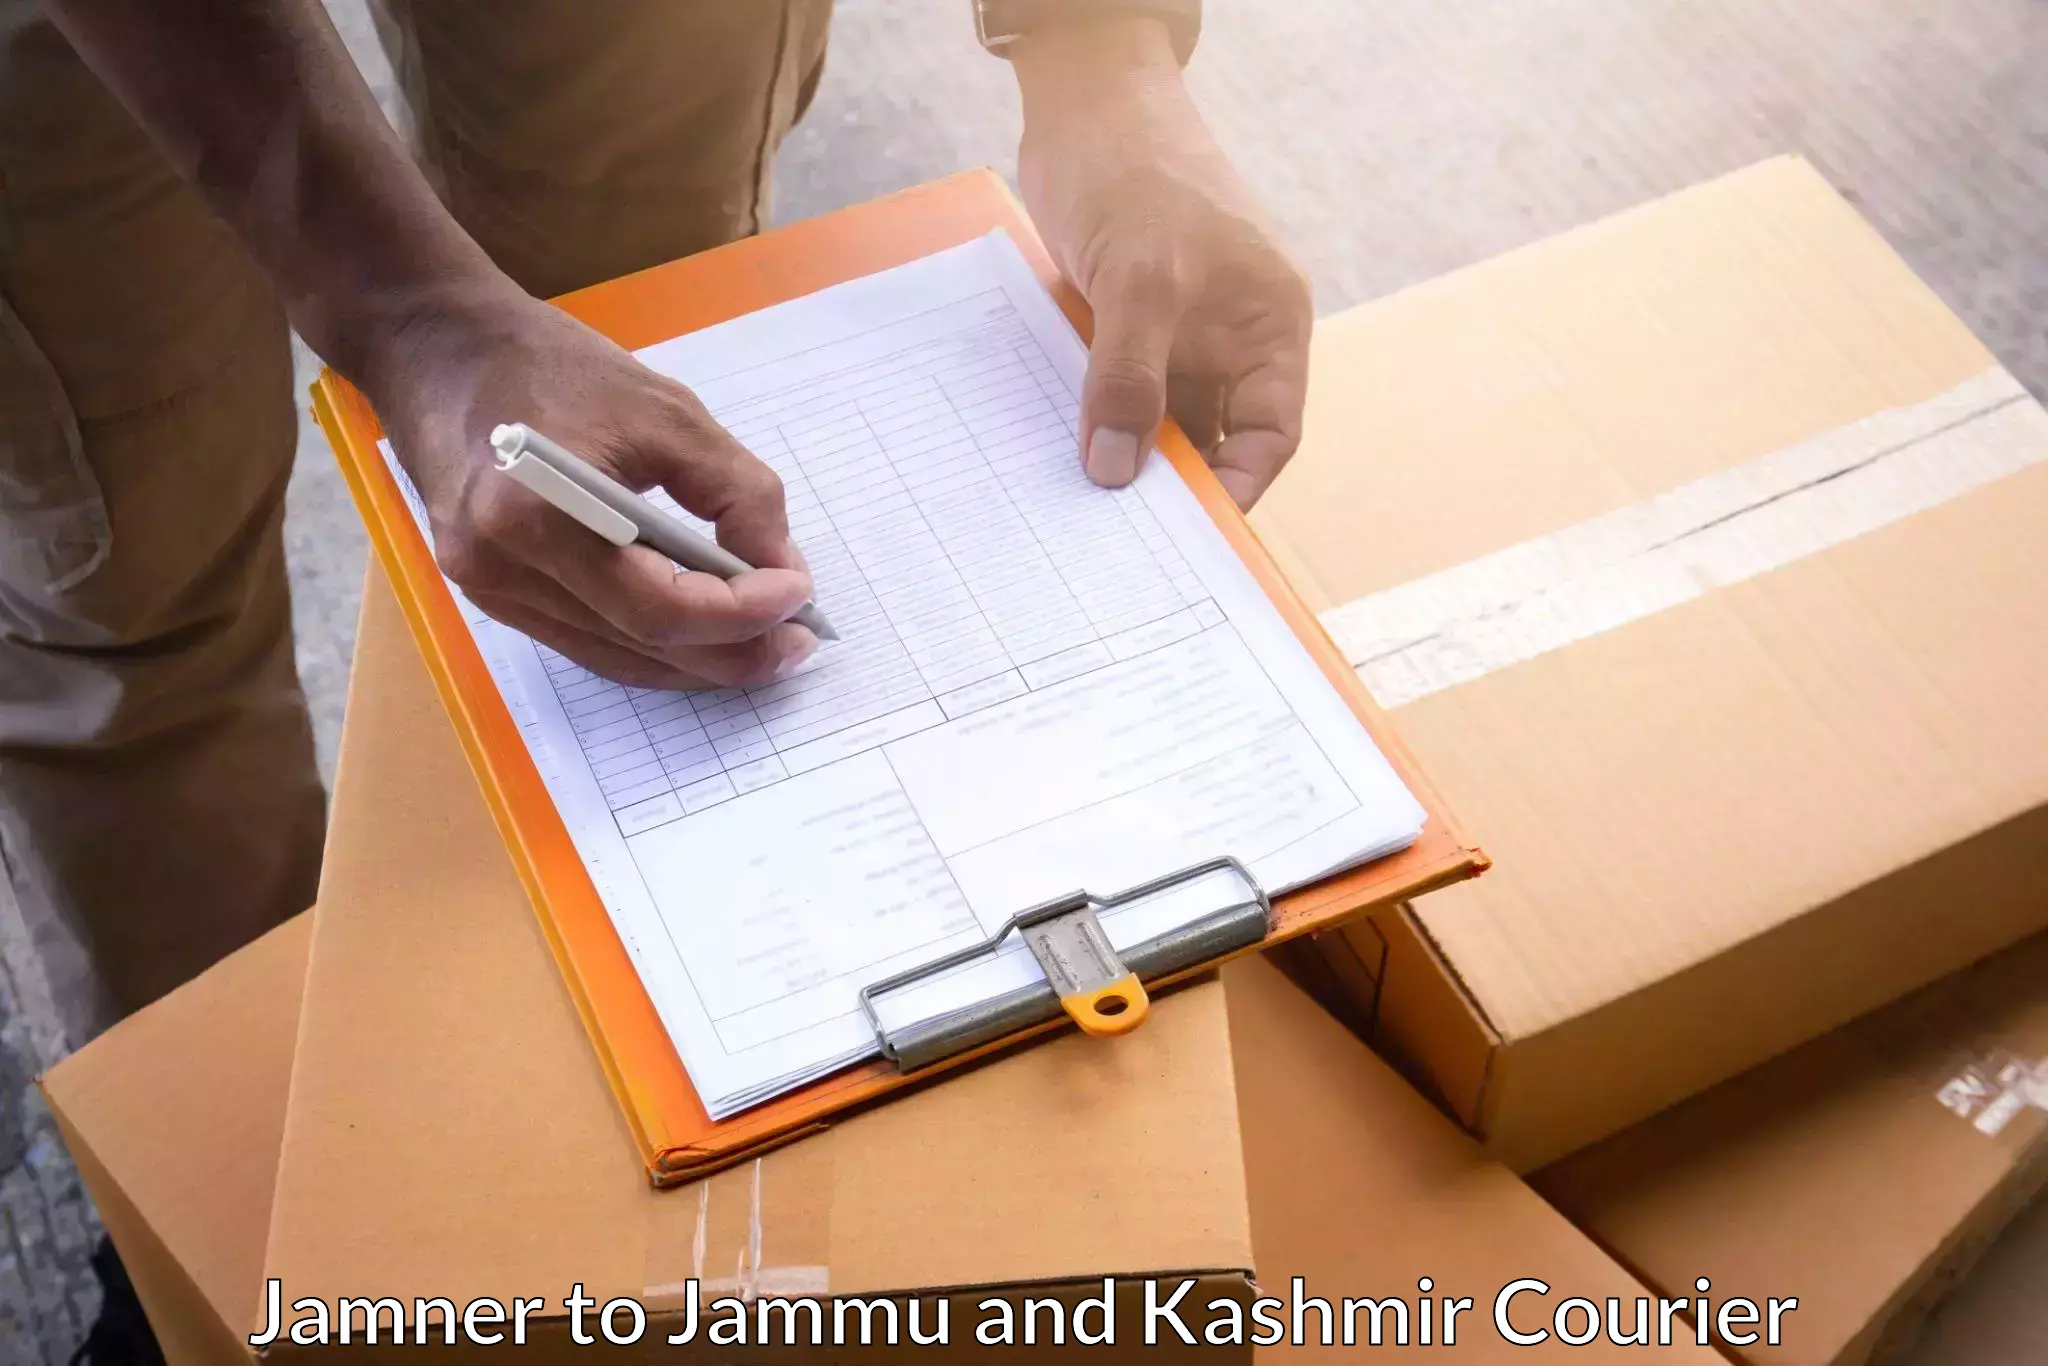 Quality courier services Jamner to Jammu and Kashmir